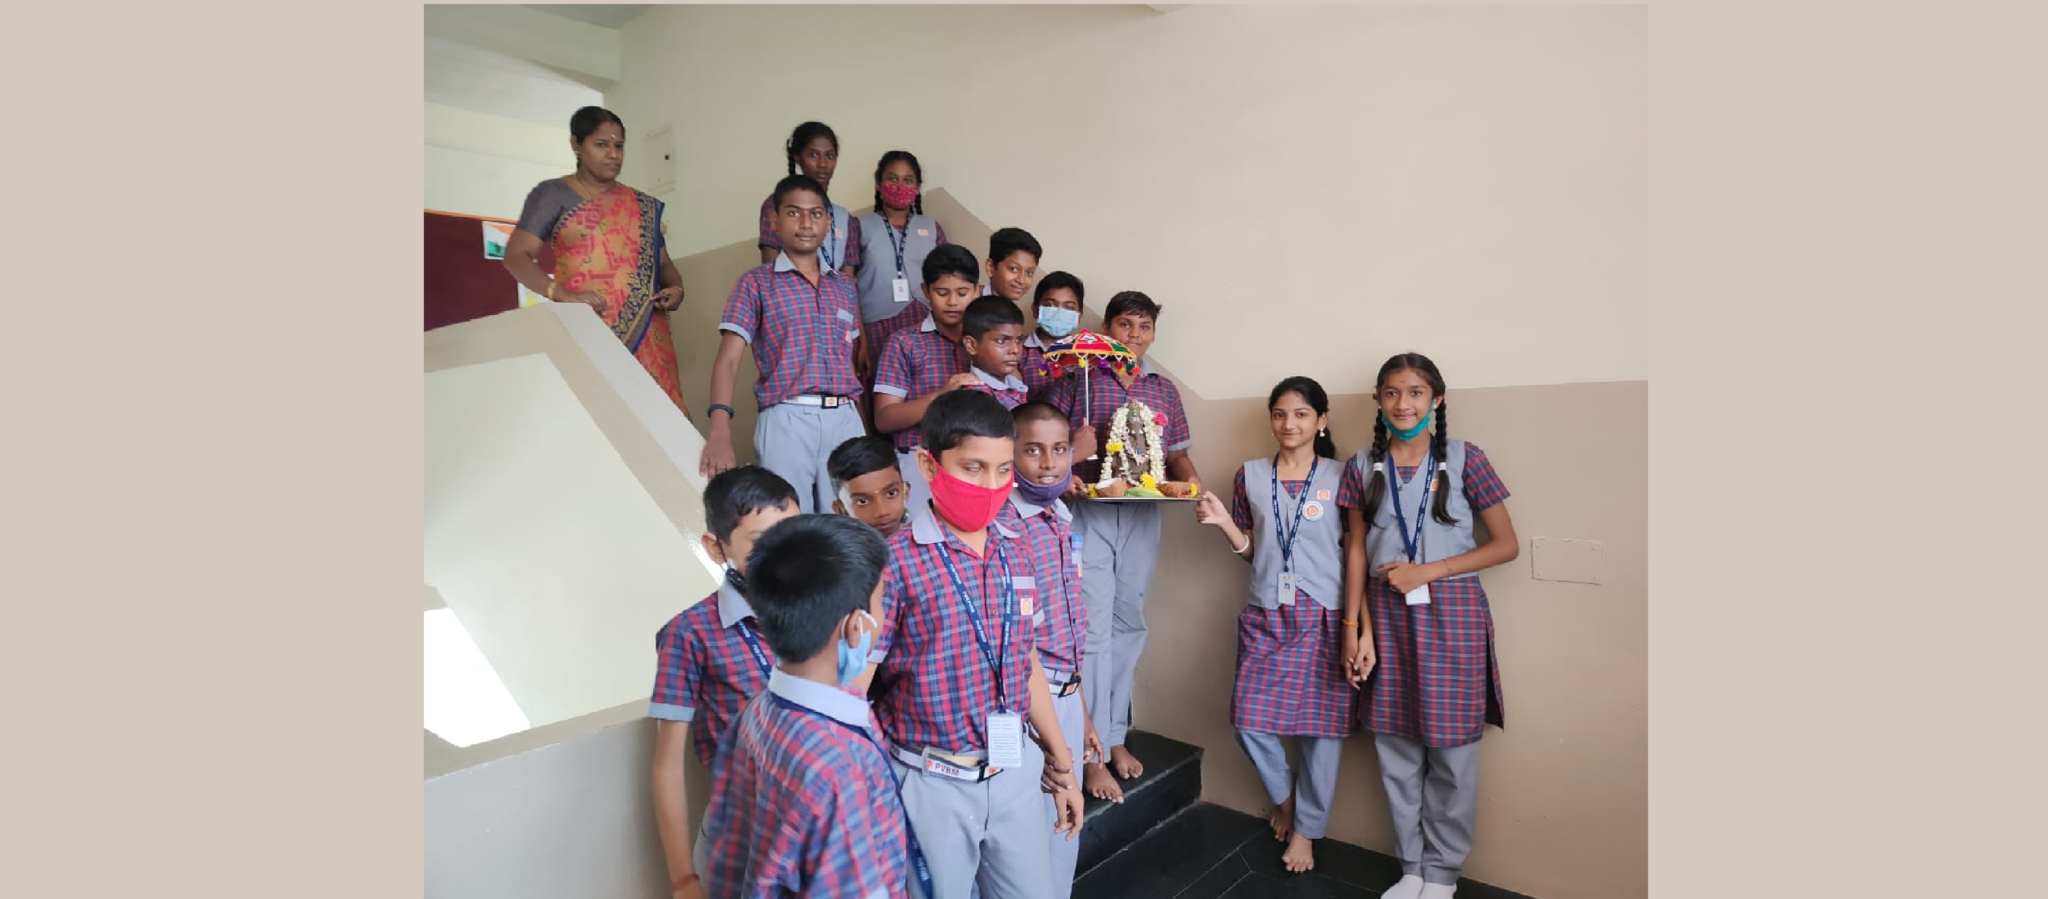 Lord Ganesha showered his blessing throughout the school campus